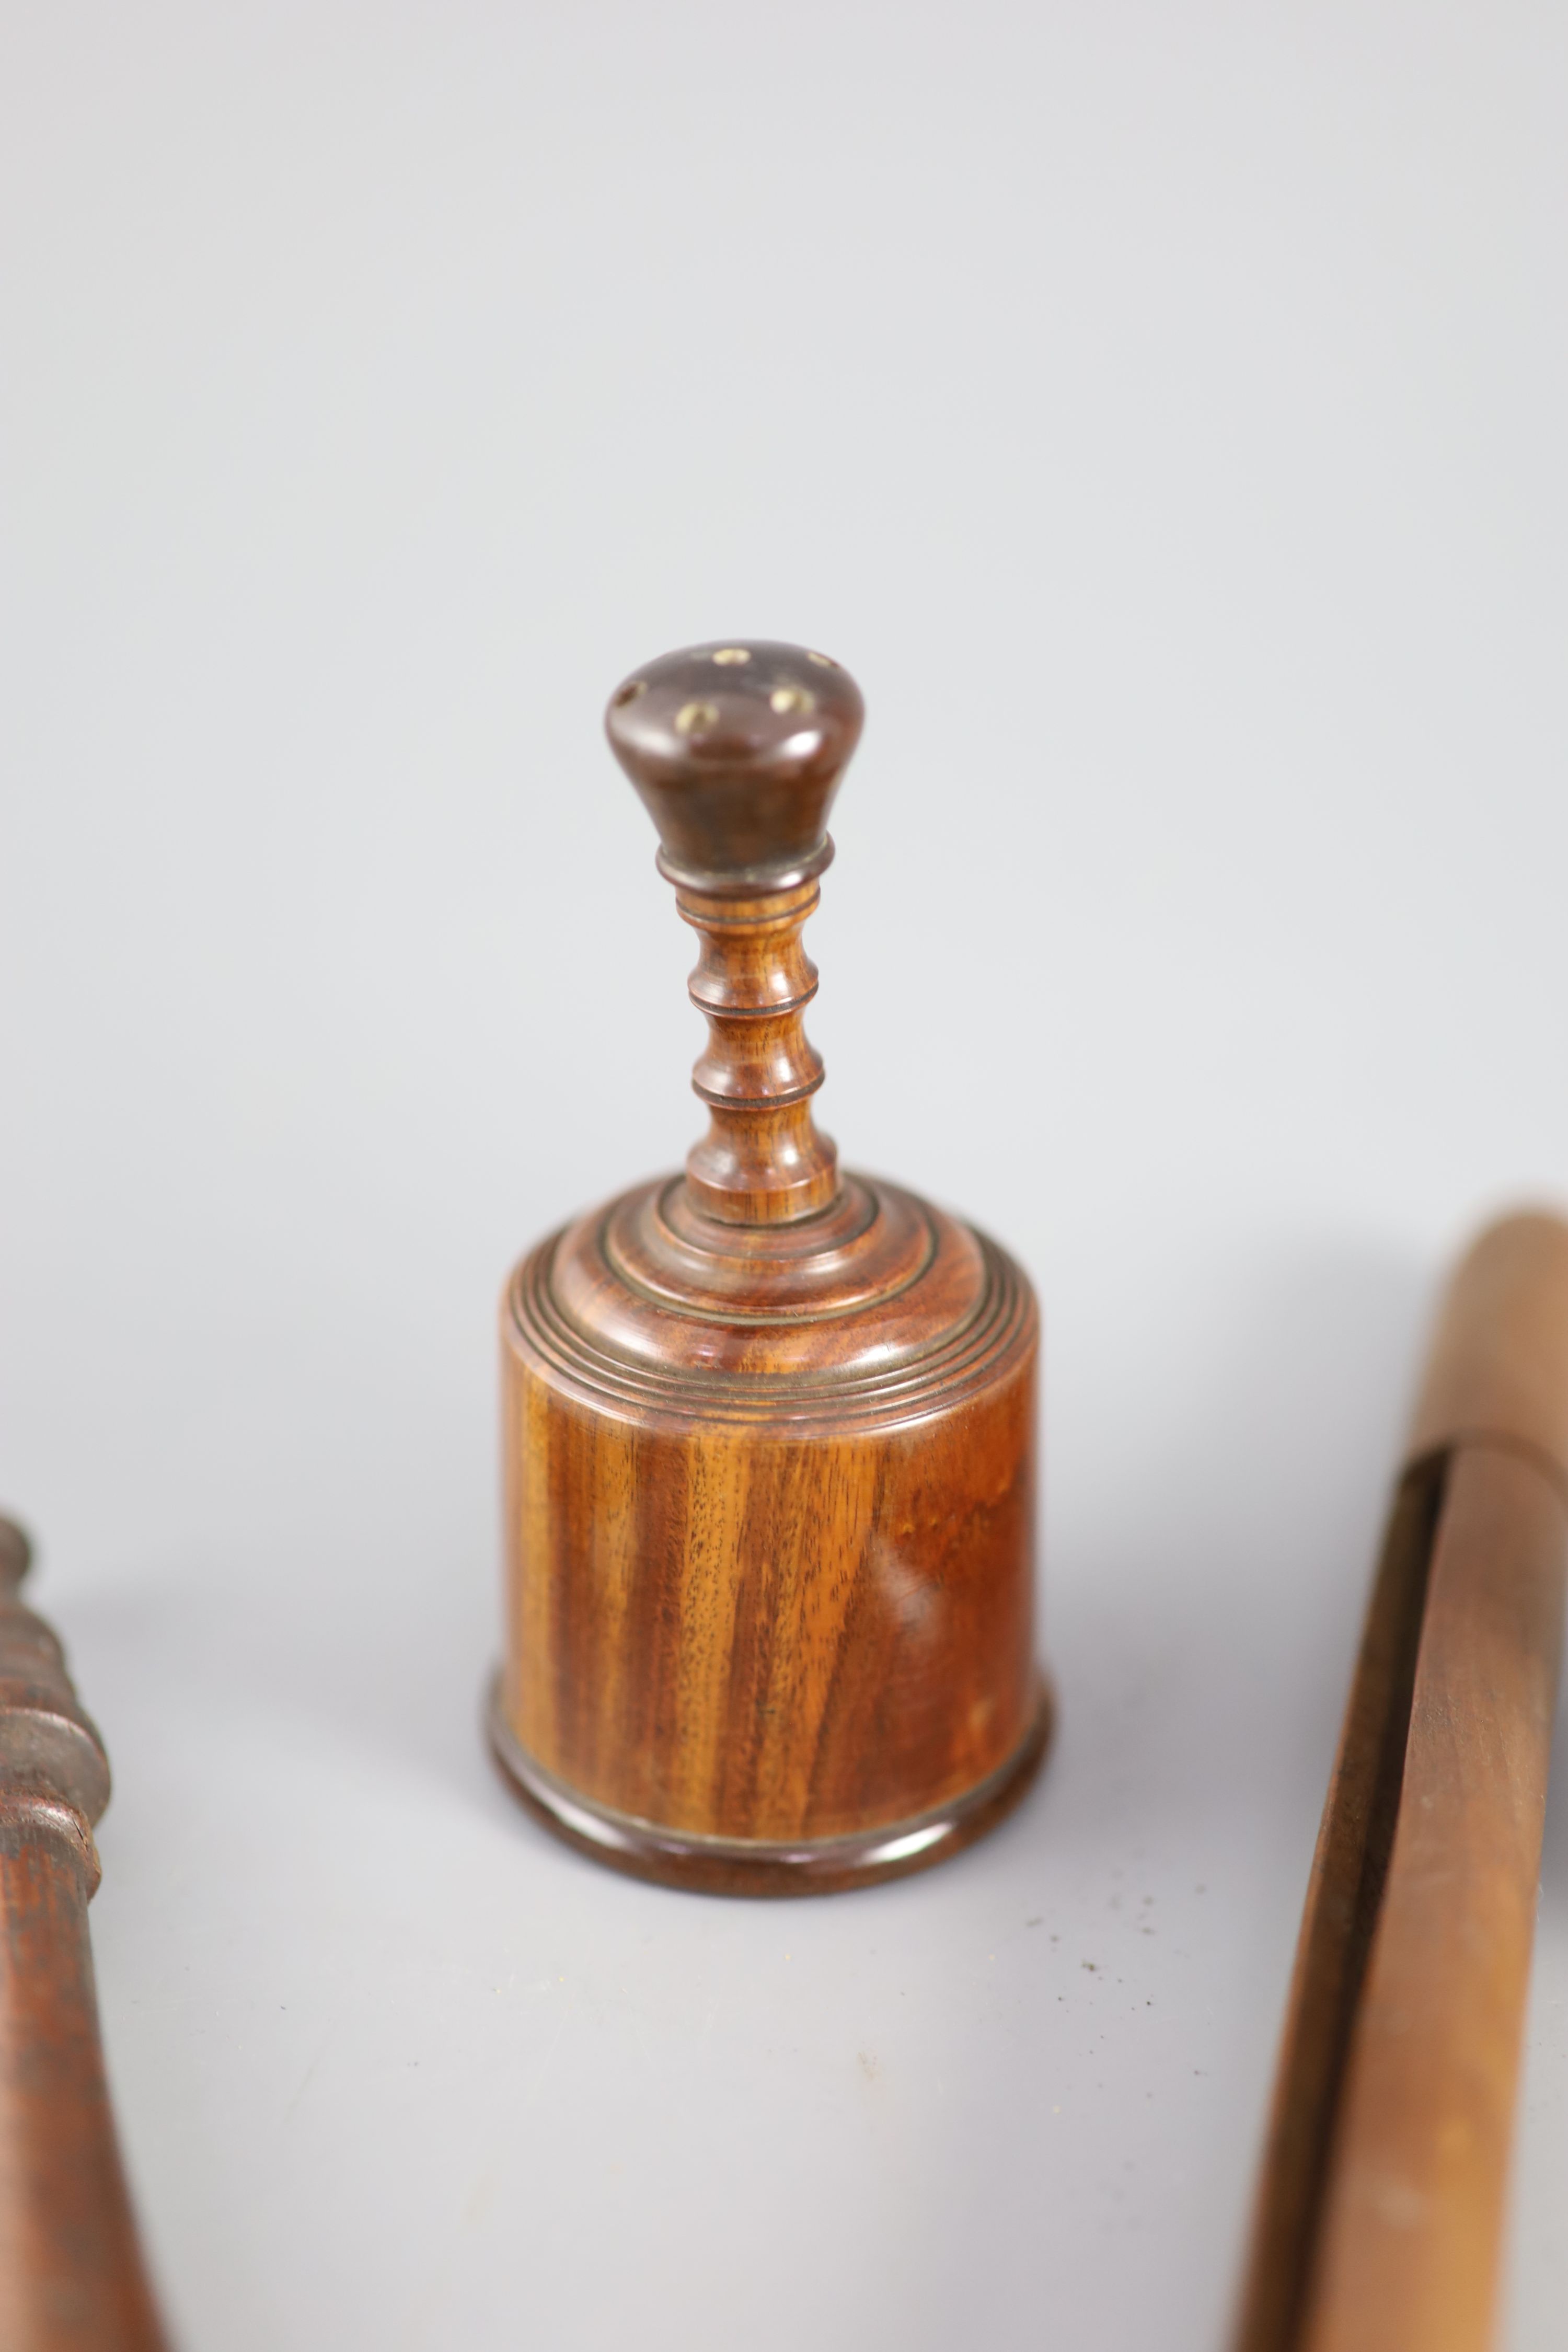 A late 18th century treen spool holder and silk winder